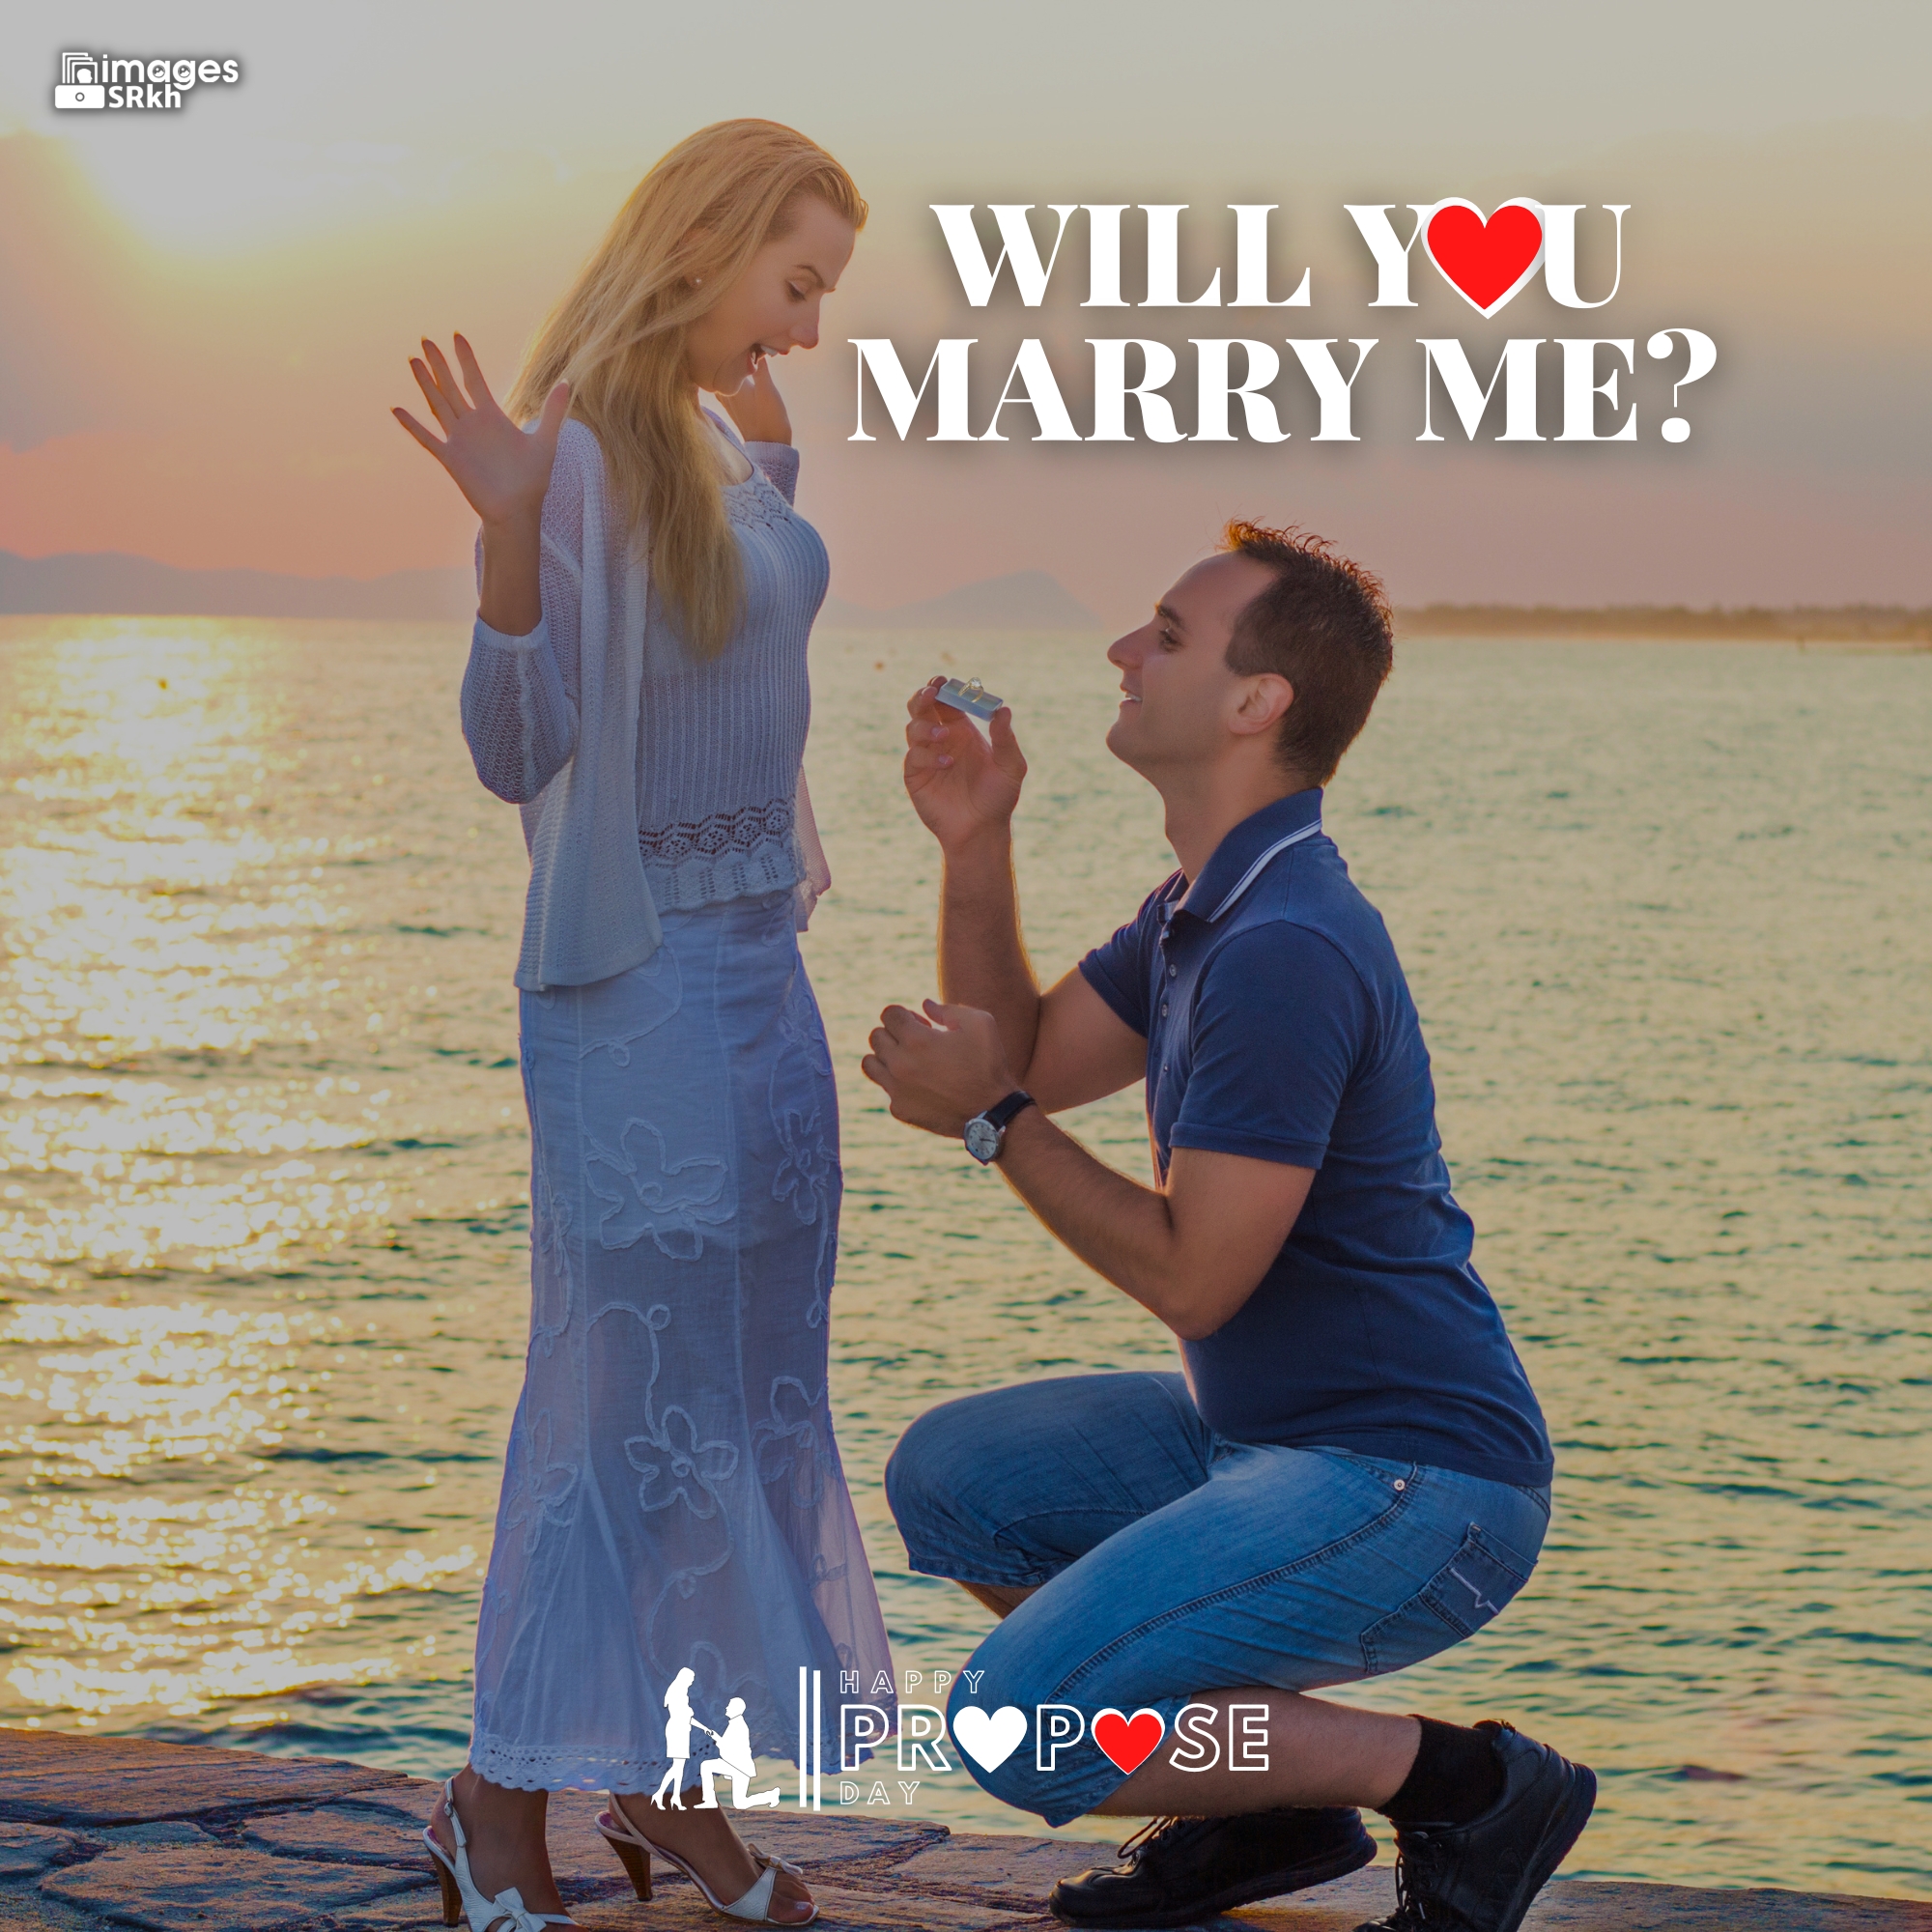 Propose Day Images | 268 | Will You MARRY ME